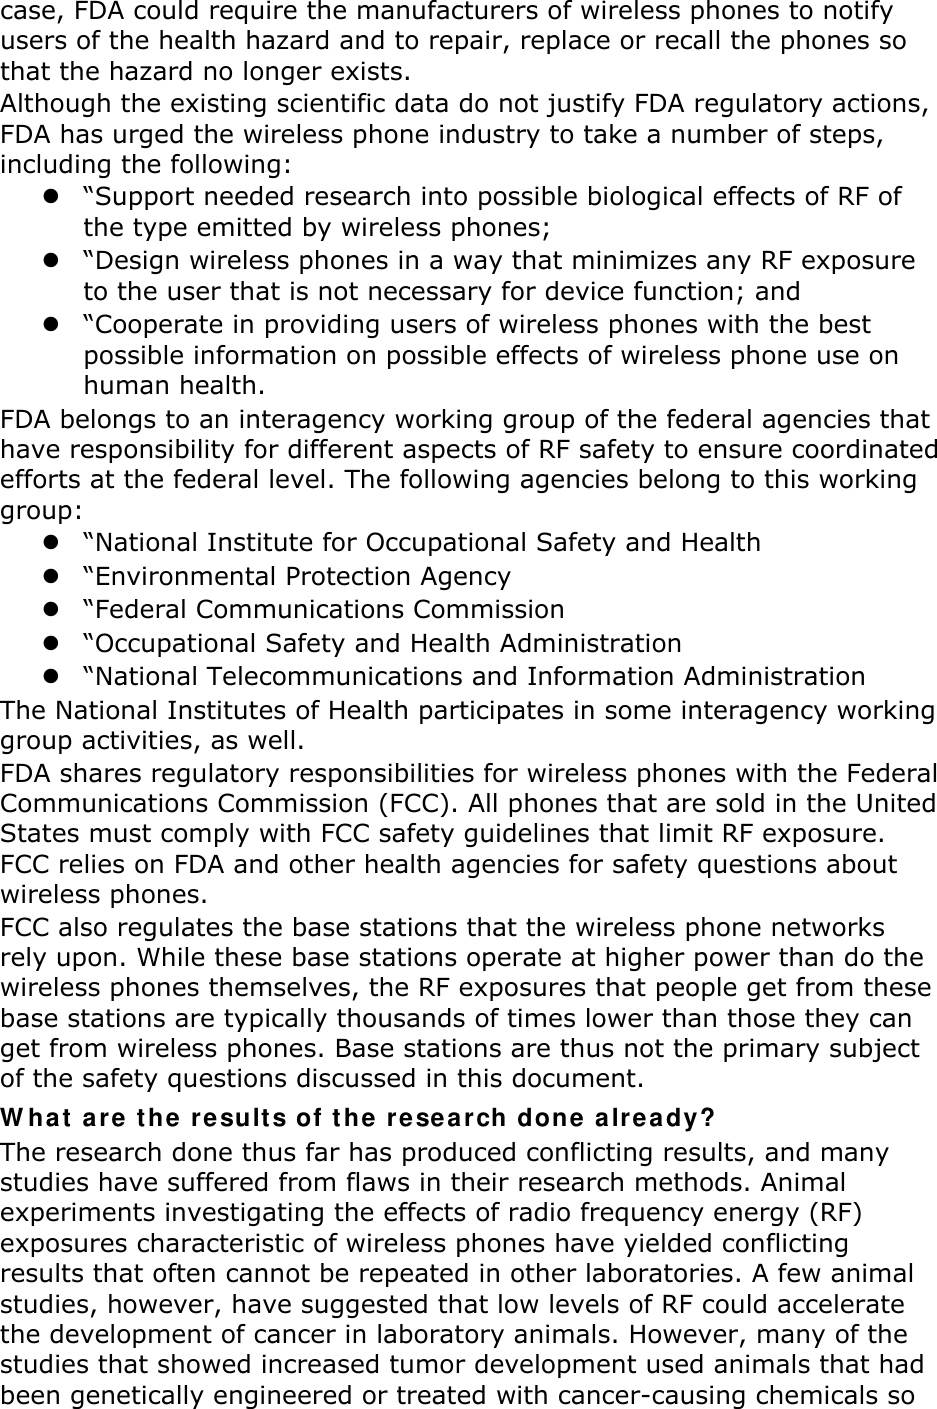 case, FDA could require the manufacturers of wireless phones to notify users of the health hazard and to repair, replace or recall the phones so that the hazard no longer exists. Although the existing scientific data do not justify FDA regulatory actions, FDA has urged the wireless phone industry to take a number of steps, including the following:  “Support needed research into possible biological effects of RF of the type emitted by wireless phones;  “Design wireless phones in a way that minimizes any RF exposure to the user that is not necessary for device function; and  “Cooperate in providing users of wireless phones with the best possible information on possible effects of wireless phone use on human health. FDA belongs to an interagency working group of the federal agencies that have responsibility for different aspects of RF safety to ensure coordinated efforts at the federal level. The following agencies belong to this working group:  “National Institute for Occupational Safety and Health  “Environmental Protection Agency  “Federal Communications Commission  “Occupational Safety and Health Administration  “National Telecommunications and Information Administration The National Institutes of Health participates in some interagency working group activities, as well. FDA shares regulatory responsibilities for wireless phones with the Federal Communications Commission (FCC). All phones that are sold in the United States must comply with FCC safety guidelines that limit RF exposure. FCC relies on FDA and other health agencies for safety questions about wireless phones. FCC also regulates the base stations that the wireless phone networks rely upon. While these base stations operate at higher power than do the wireless phones themselves, the RF exposures that people get from these base stations are typically thousands of times lower than those they can get from wireless phones. Base stations are thus not the primary subject of the safety questions discussed in this document. W hat  a r e  the re sults of the  rese a rch done alrea dy? The research done thus far has produced conflicting results, and many studies have suffered from flaws in their research methods. Animal experiments investigating the effects of radio frequency energy (RF) exposures characteristic of wireless phones have yielded conflicting results that often cannot be repeated in other laboratories. A few animal studies, however, have suggested that low levels of RF could accelerate the development of cancer in laboratory animals. However, many of the studies that showed increased tumor development used animals that had been genetically engineered or treated with cancer-causing chemicals so 